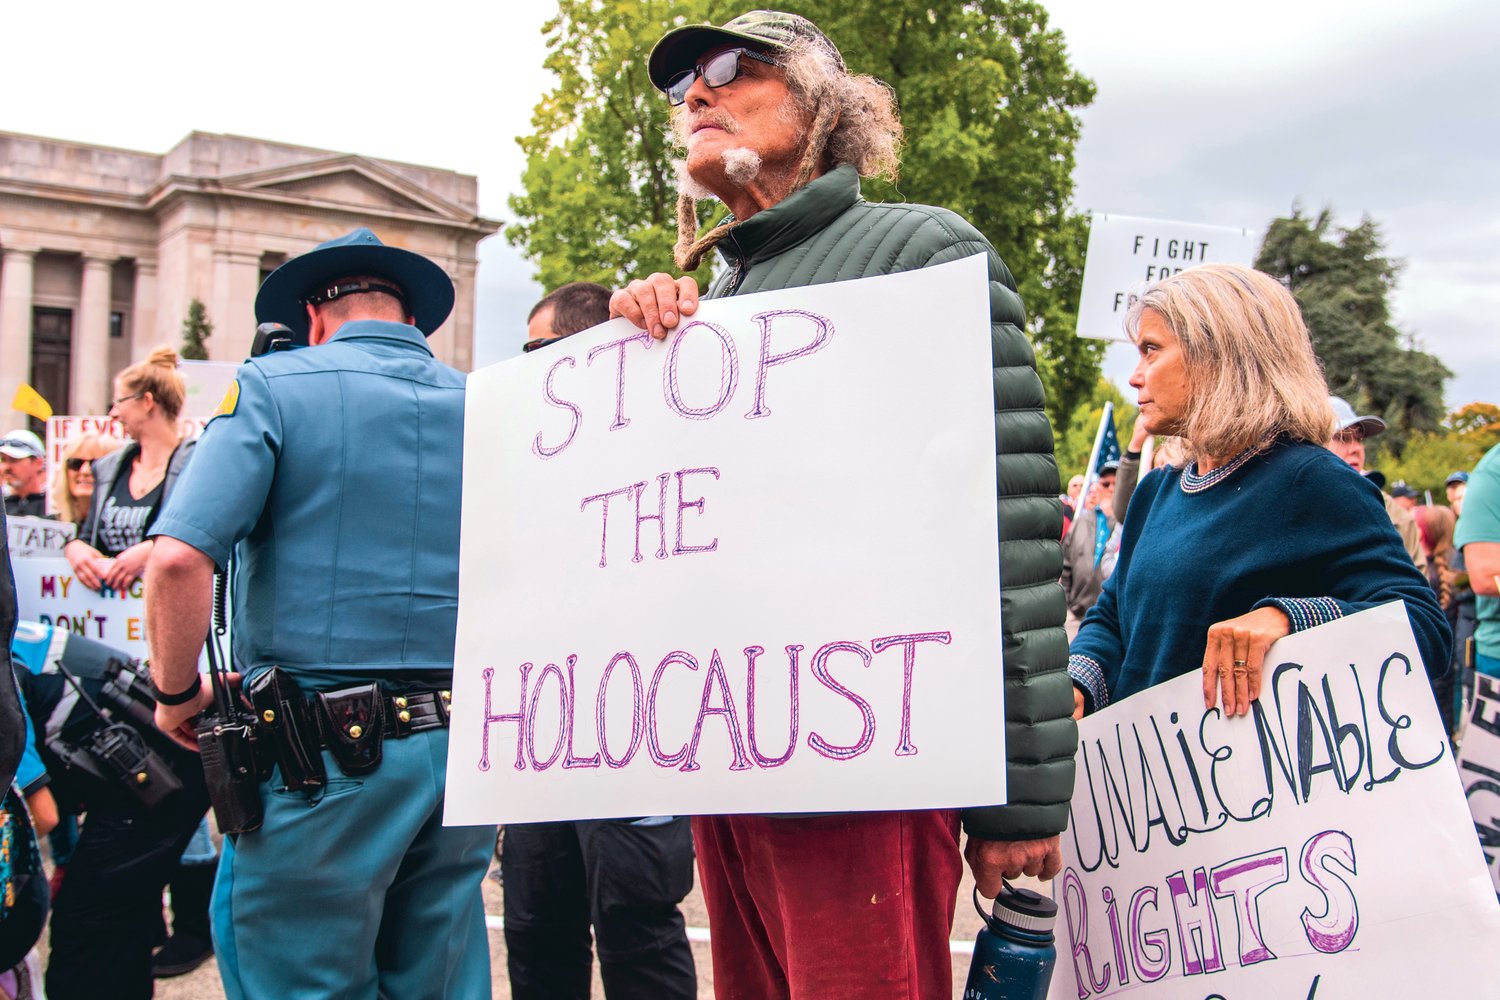 A sign is held during a “Medical Freedom Rally” in Olympia that reads, “Stop The Holocaust,” as members of the Washington State Patrol respond to a medical event in the crowd Sunday afternoon.